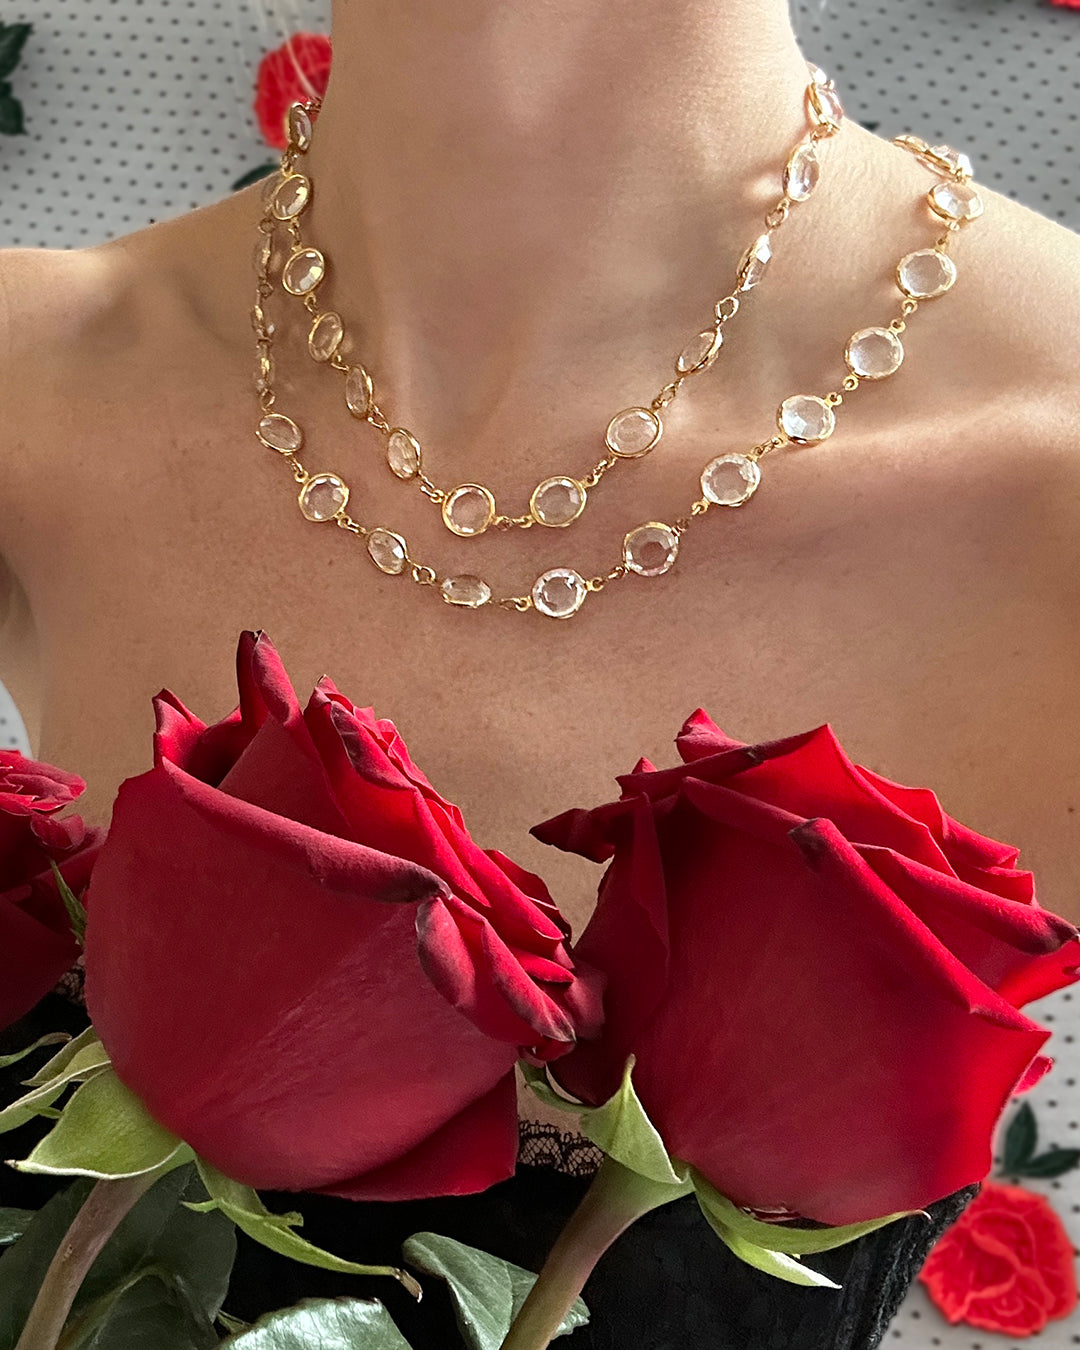 GEORGIAN STYLE ROSE-CUT RIVIERE NECKLACE